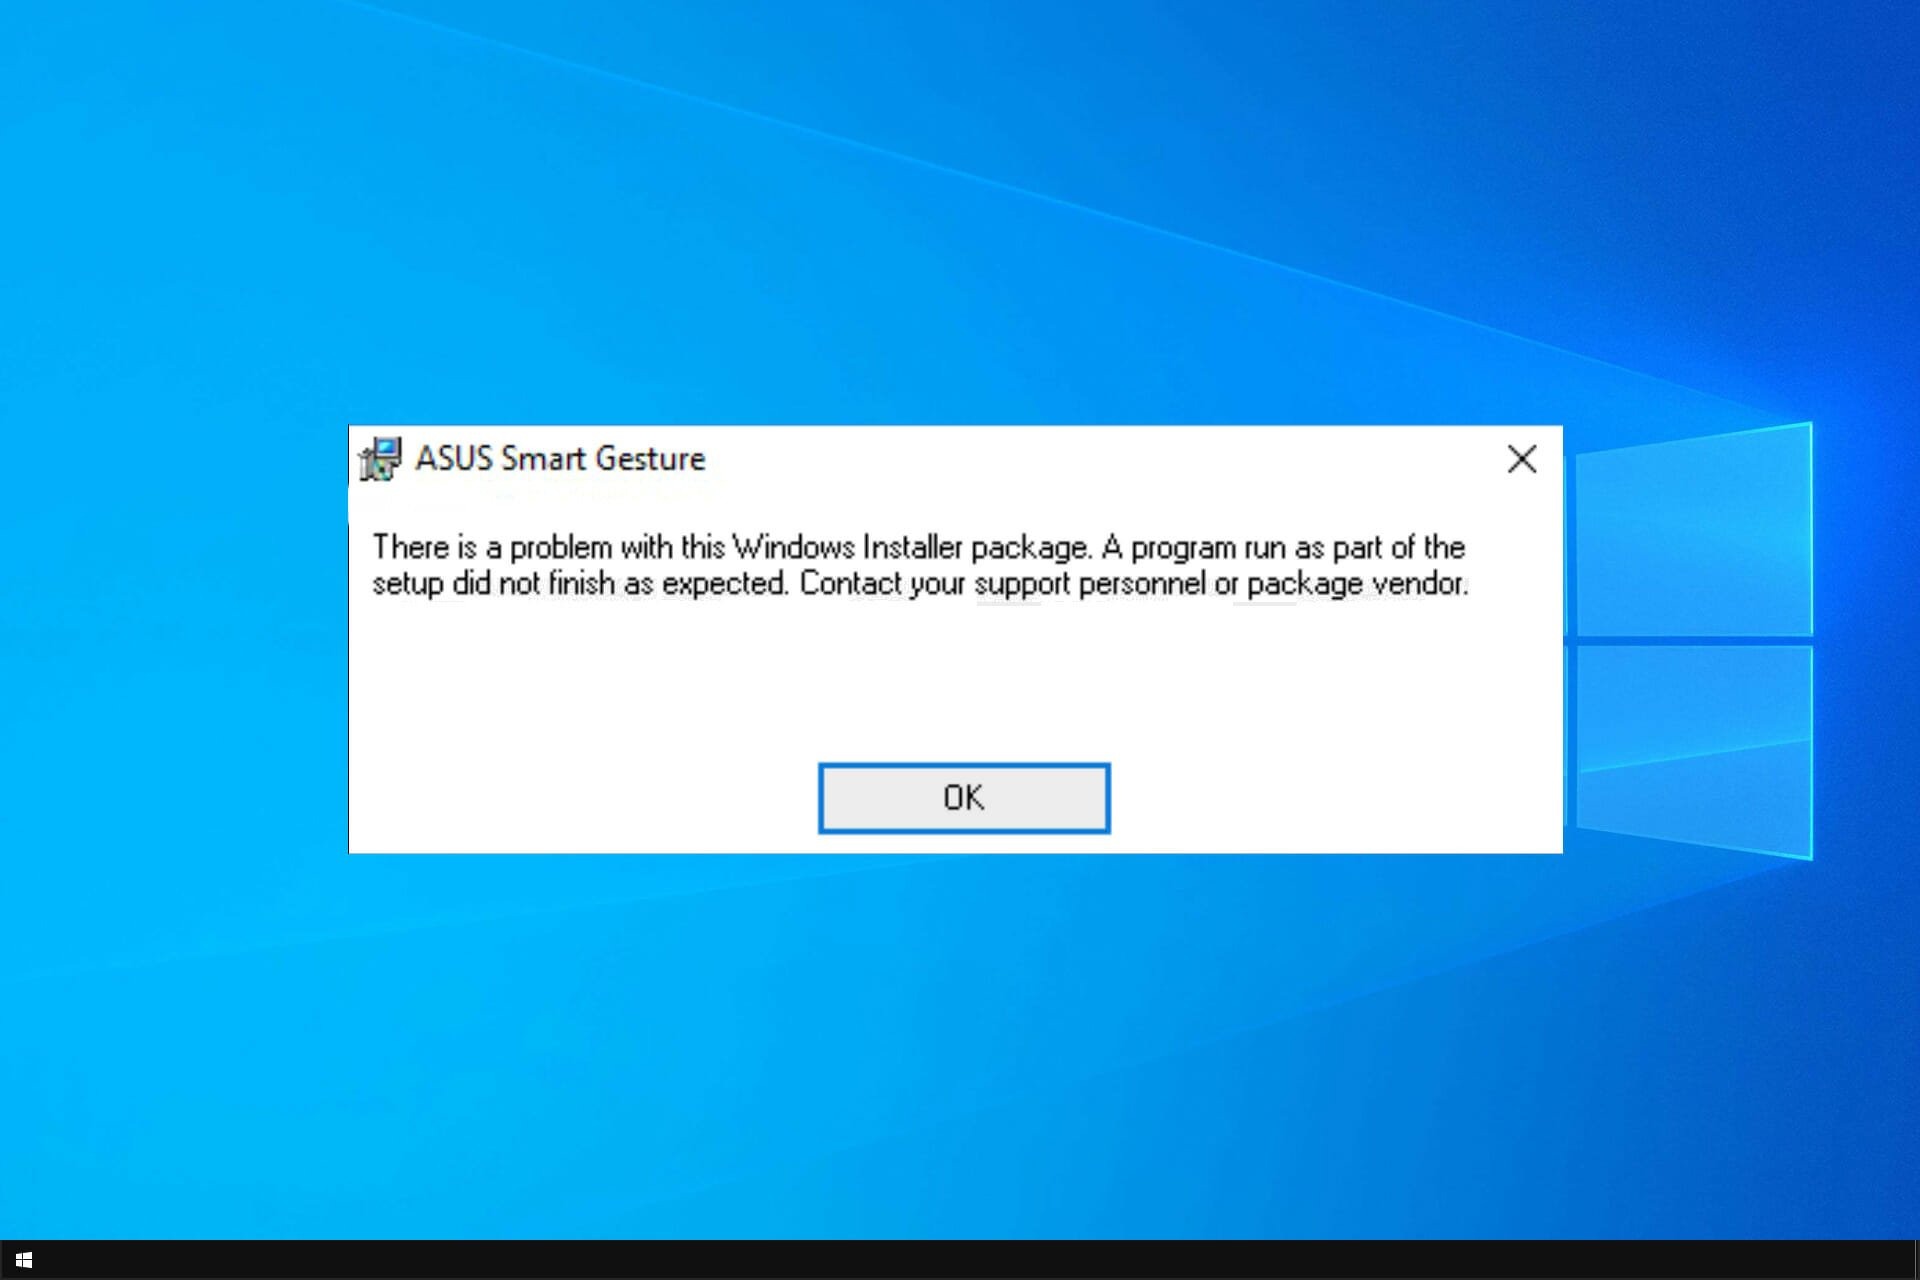 How To Fix The ‘Problem With This Windows Installer Package’ Error